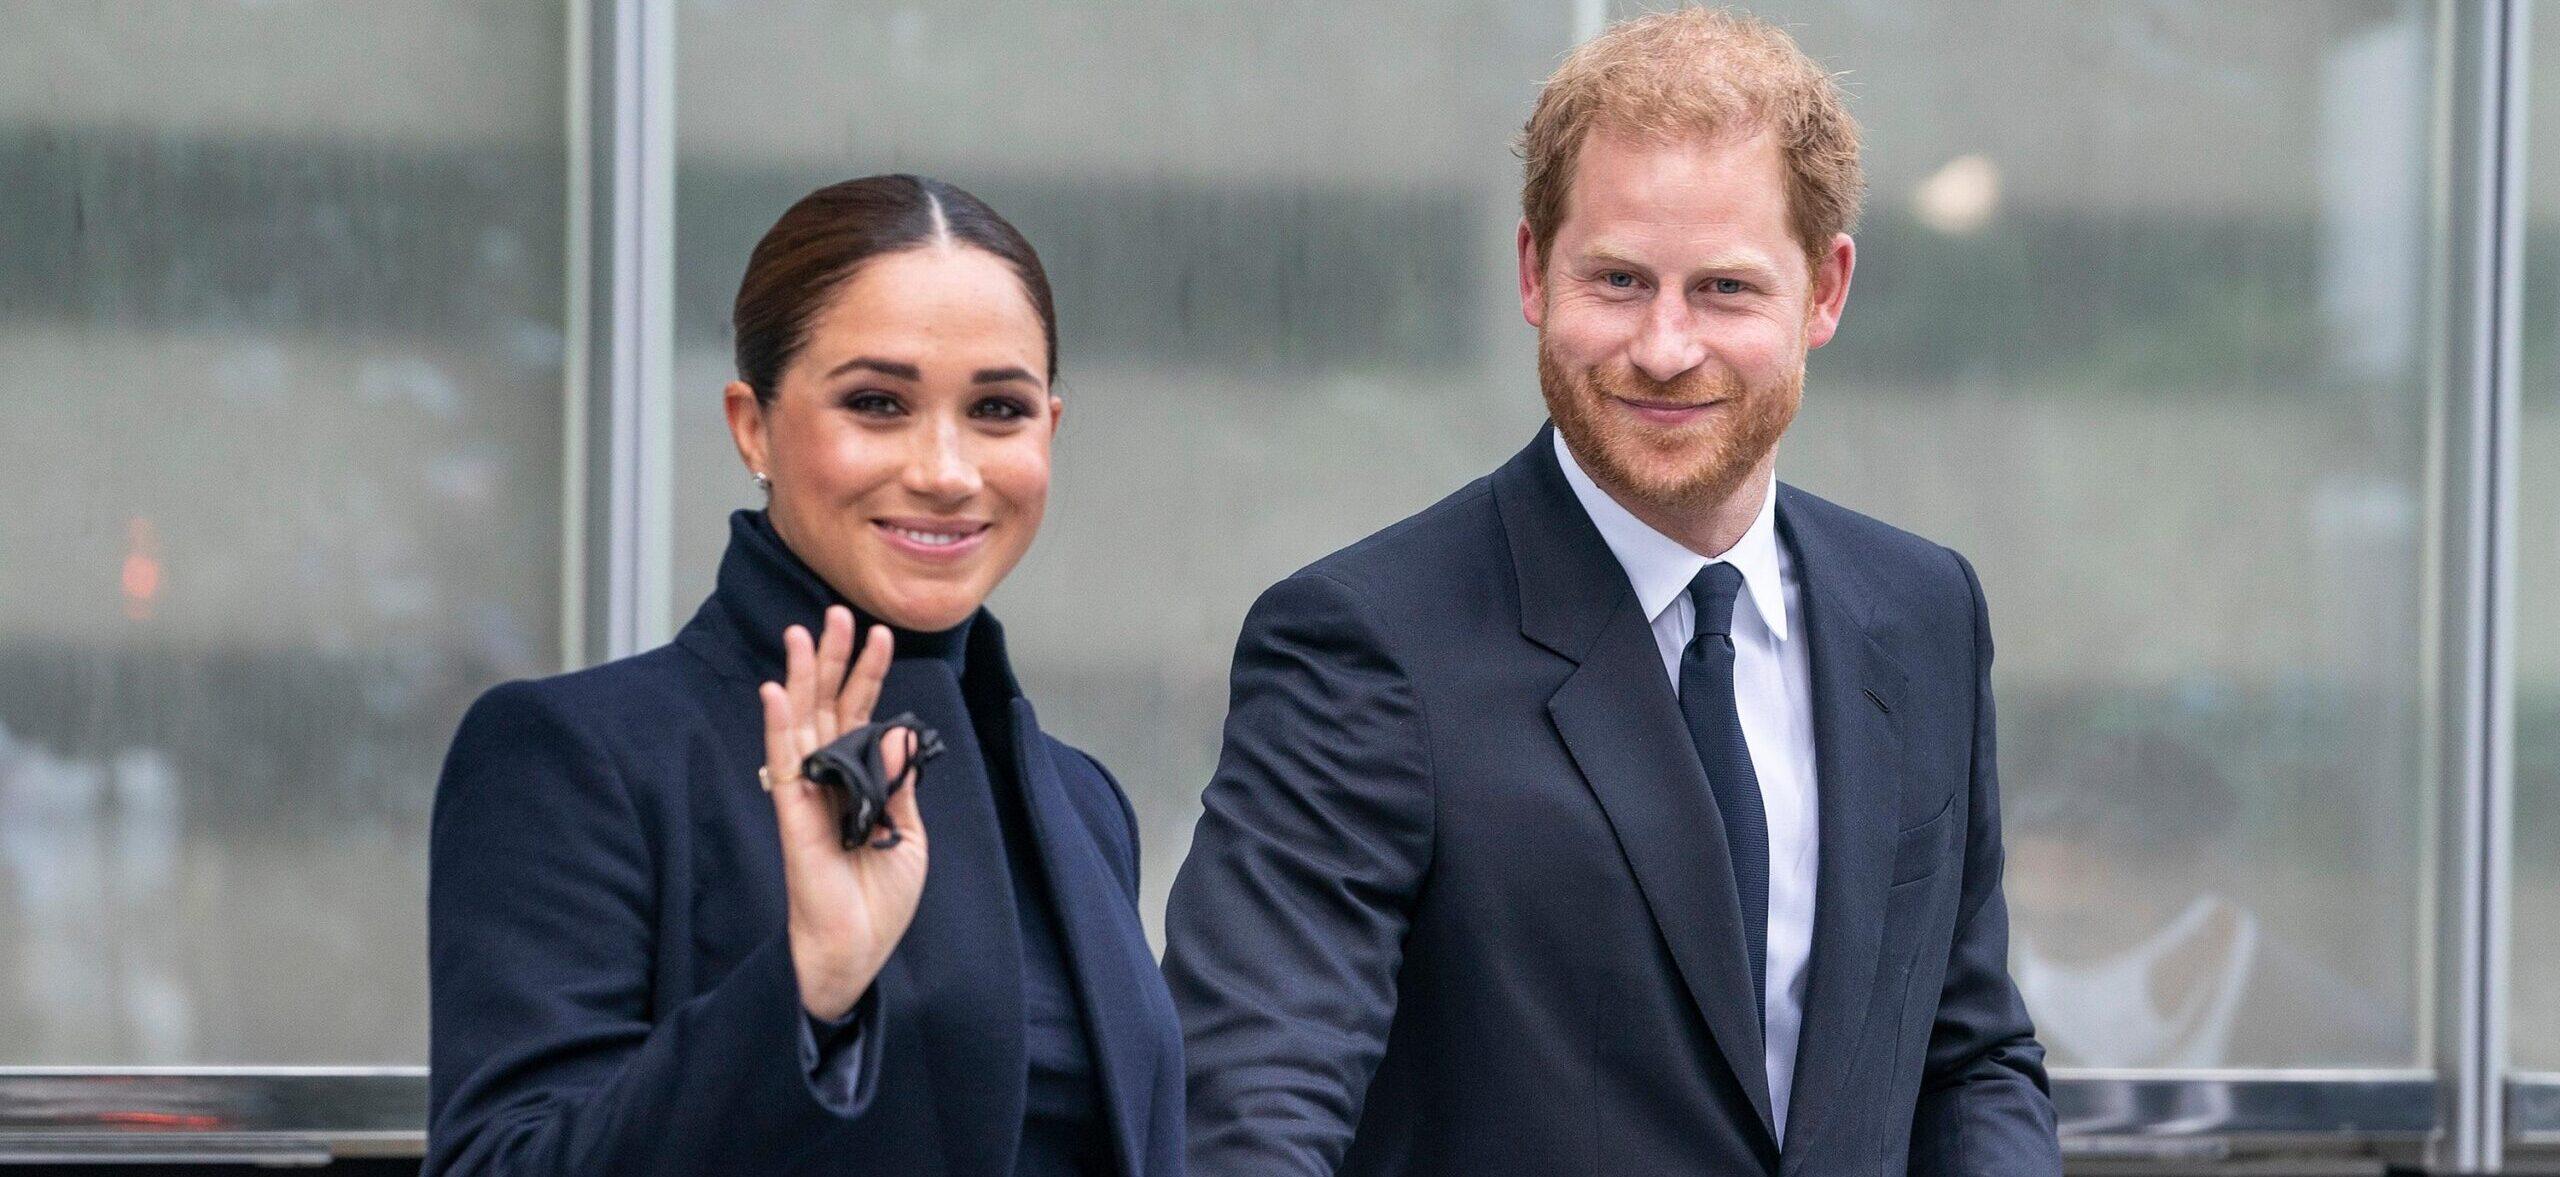 Prince Harry And Meghan Markle’s Unconventional Valentine’s Day Plans Revealed